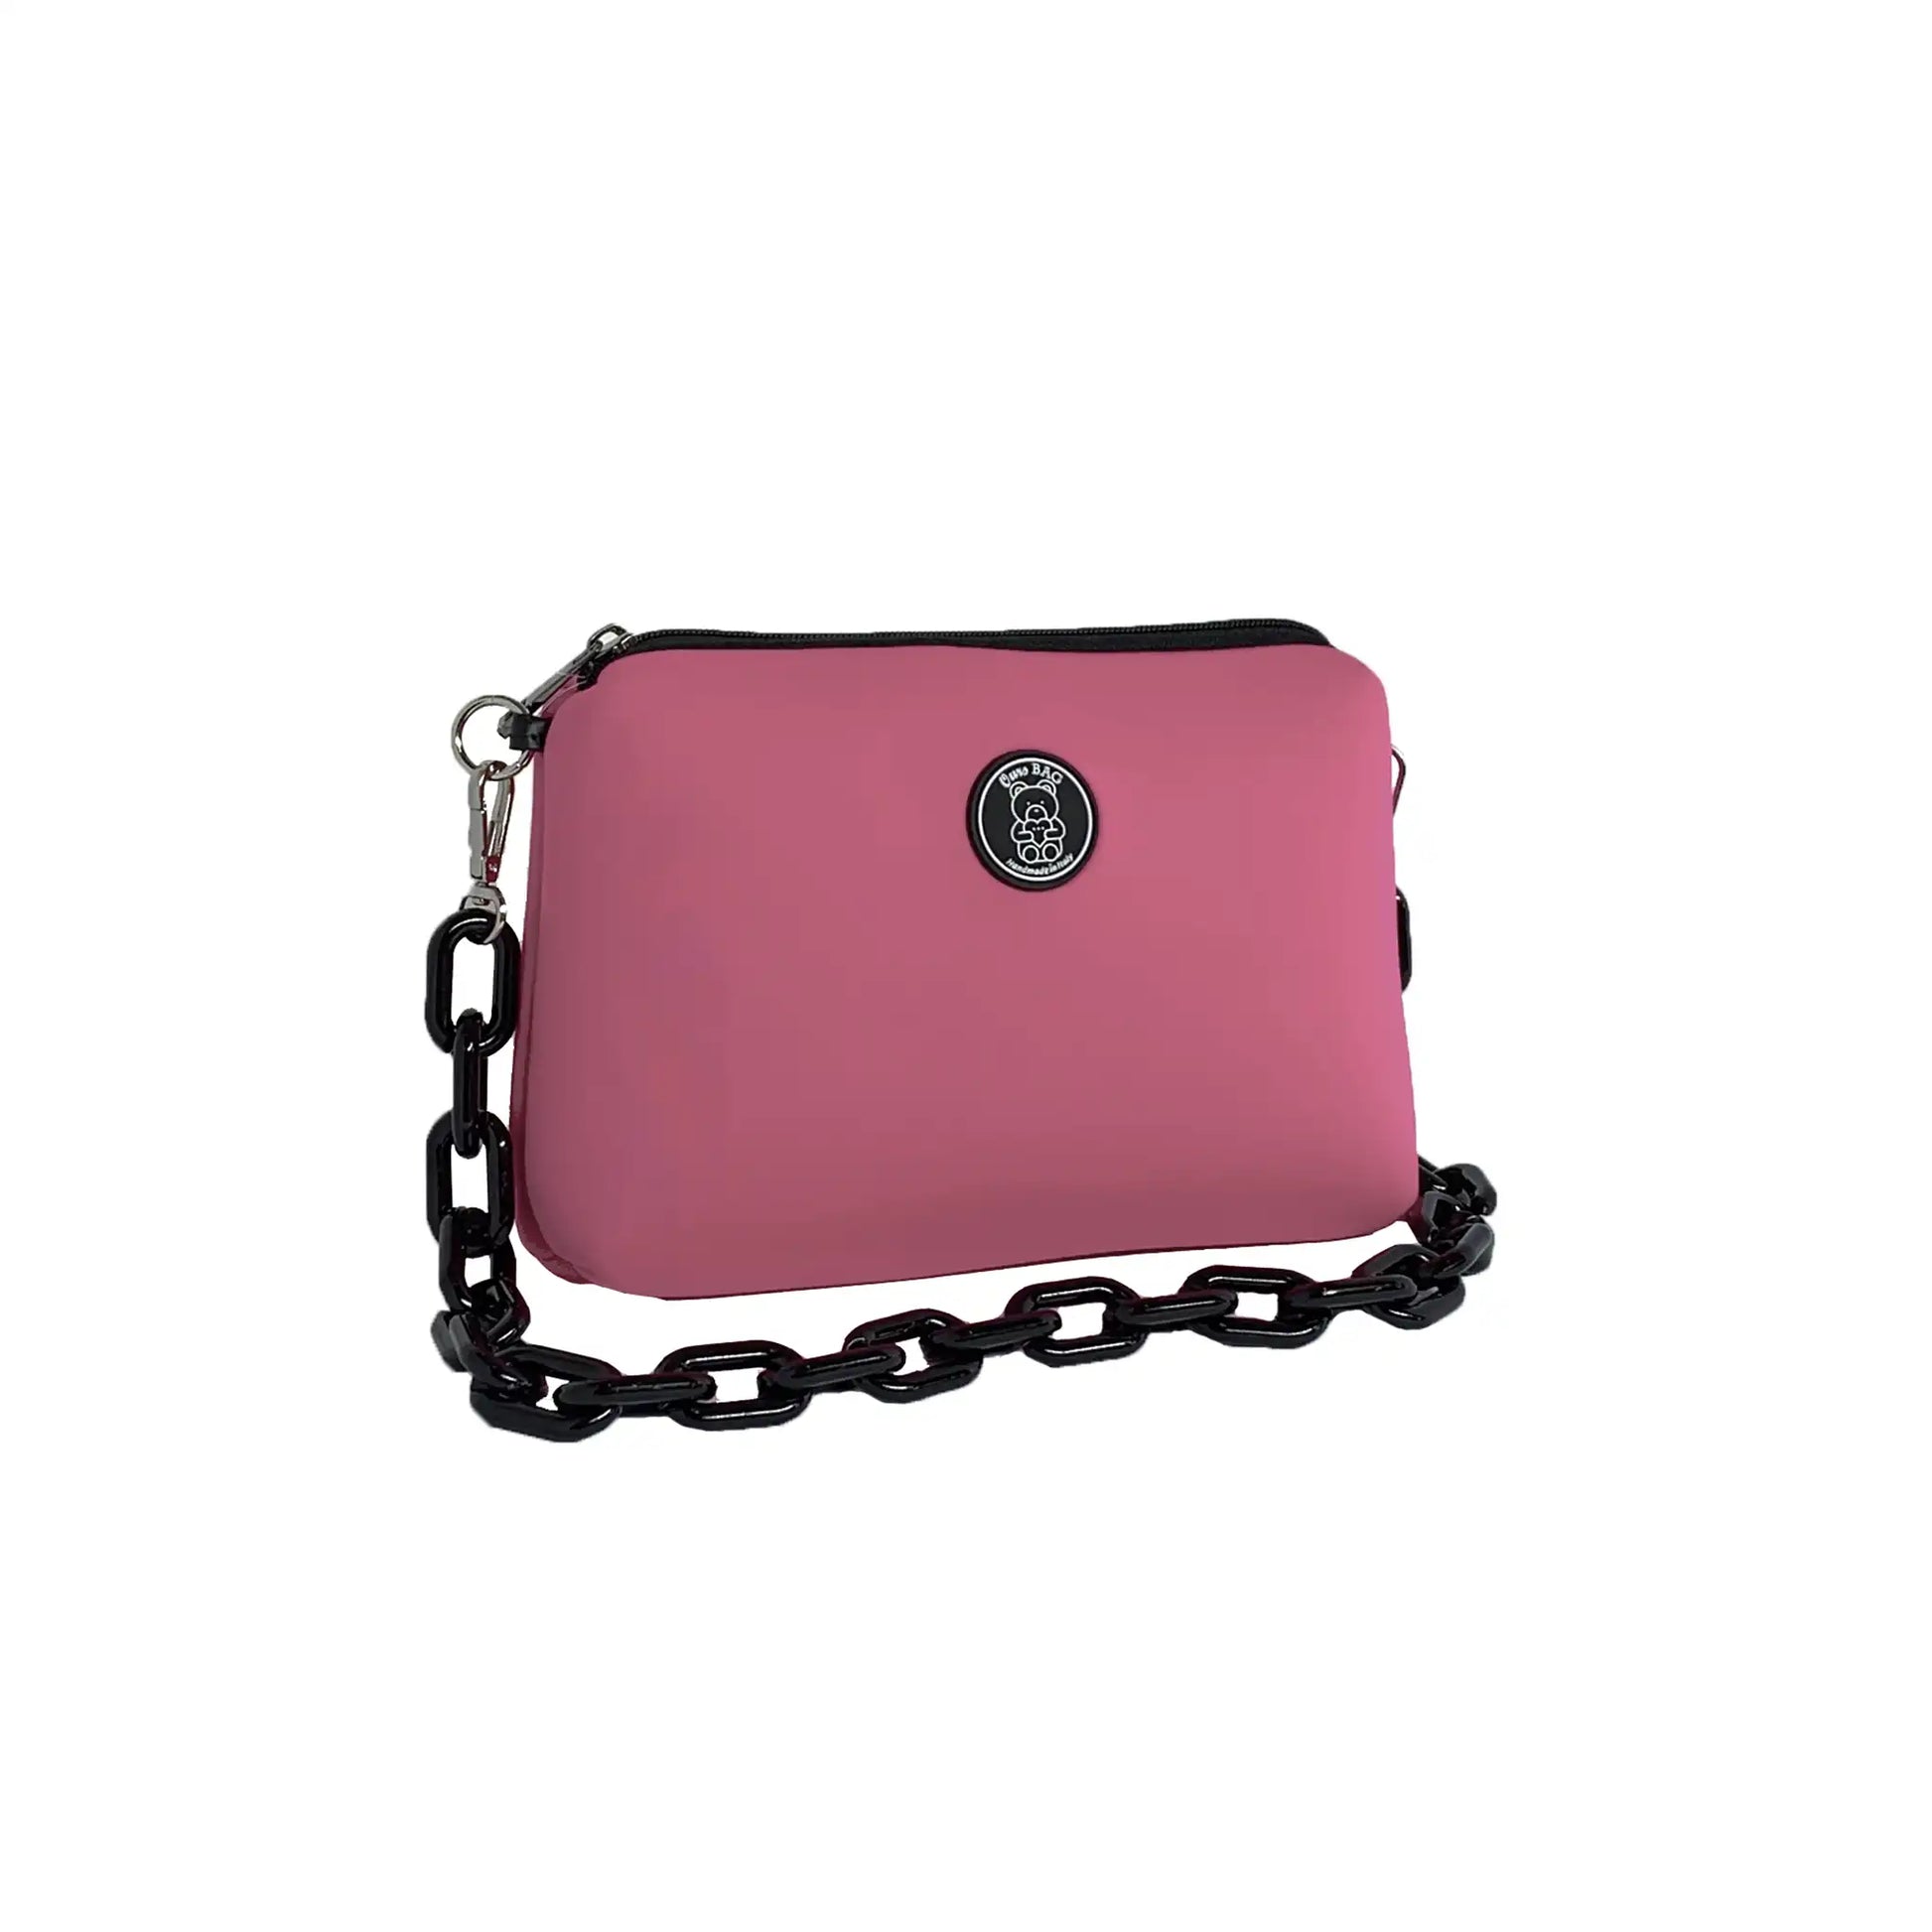 Pochette con Catena (Pink) by Ours Bag